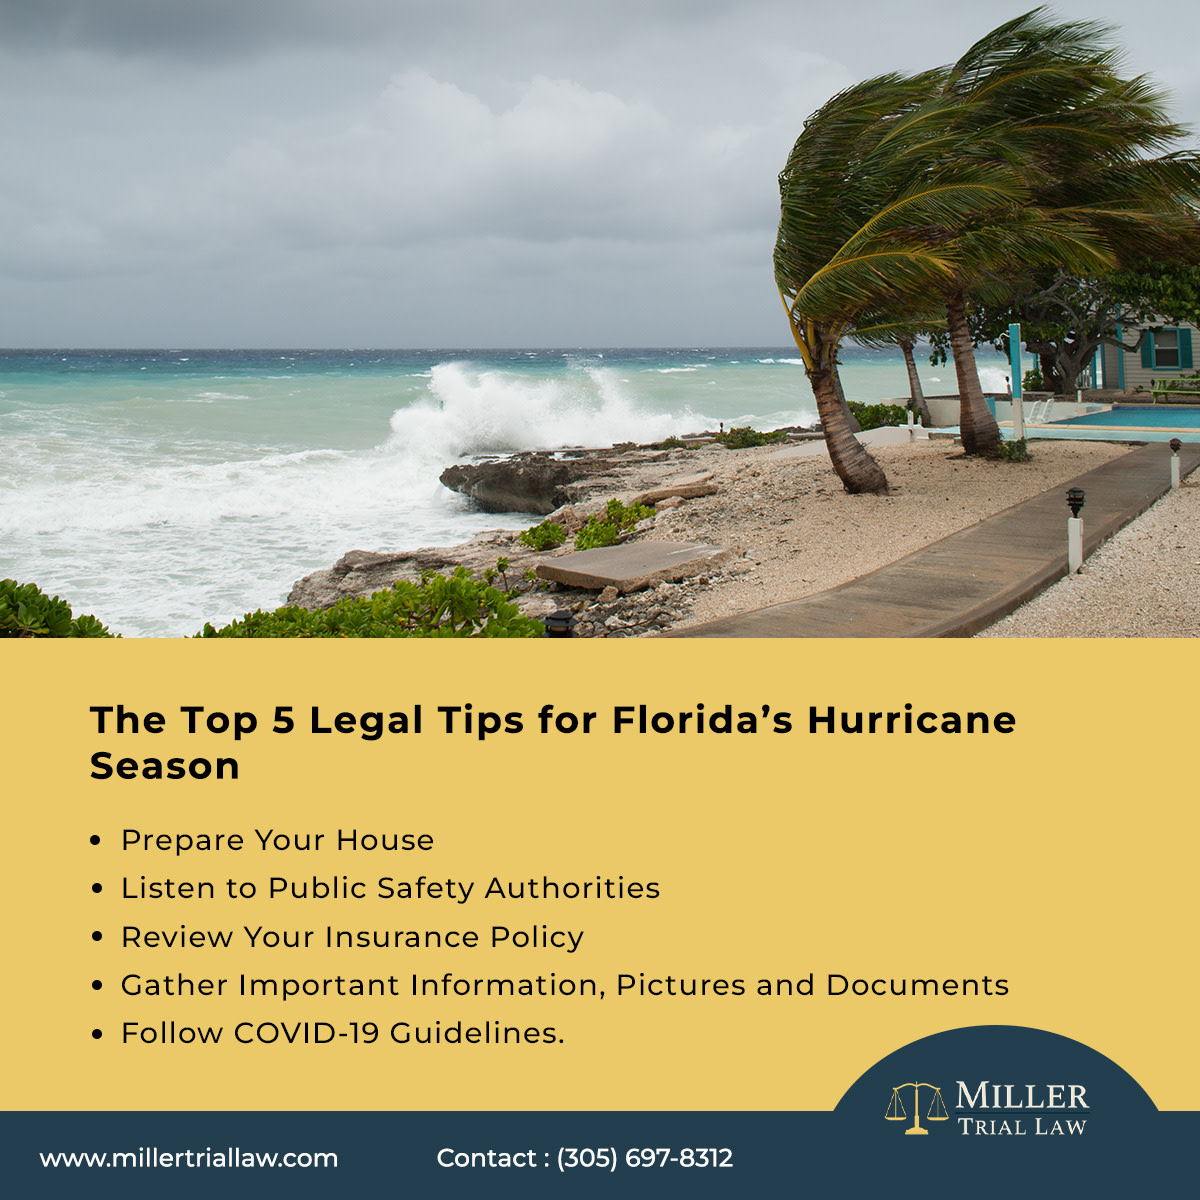 6 Steps to Take if You Have Been Injured by a Product in Florida
VIEW TIPS... millertriallaw.com

#personalinjurylawyer #personalinjuryattorney #piattorney #pilawyer #miami #fortlauderdale #browardcounty #miamidadecounty#miamilawyer #miamiattorney